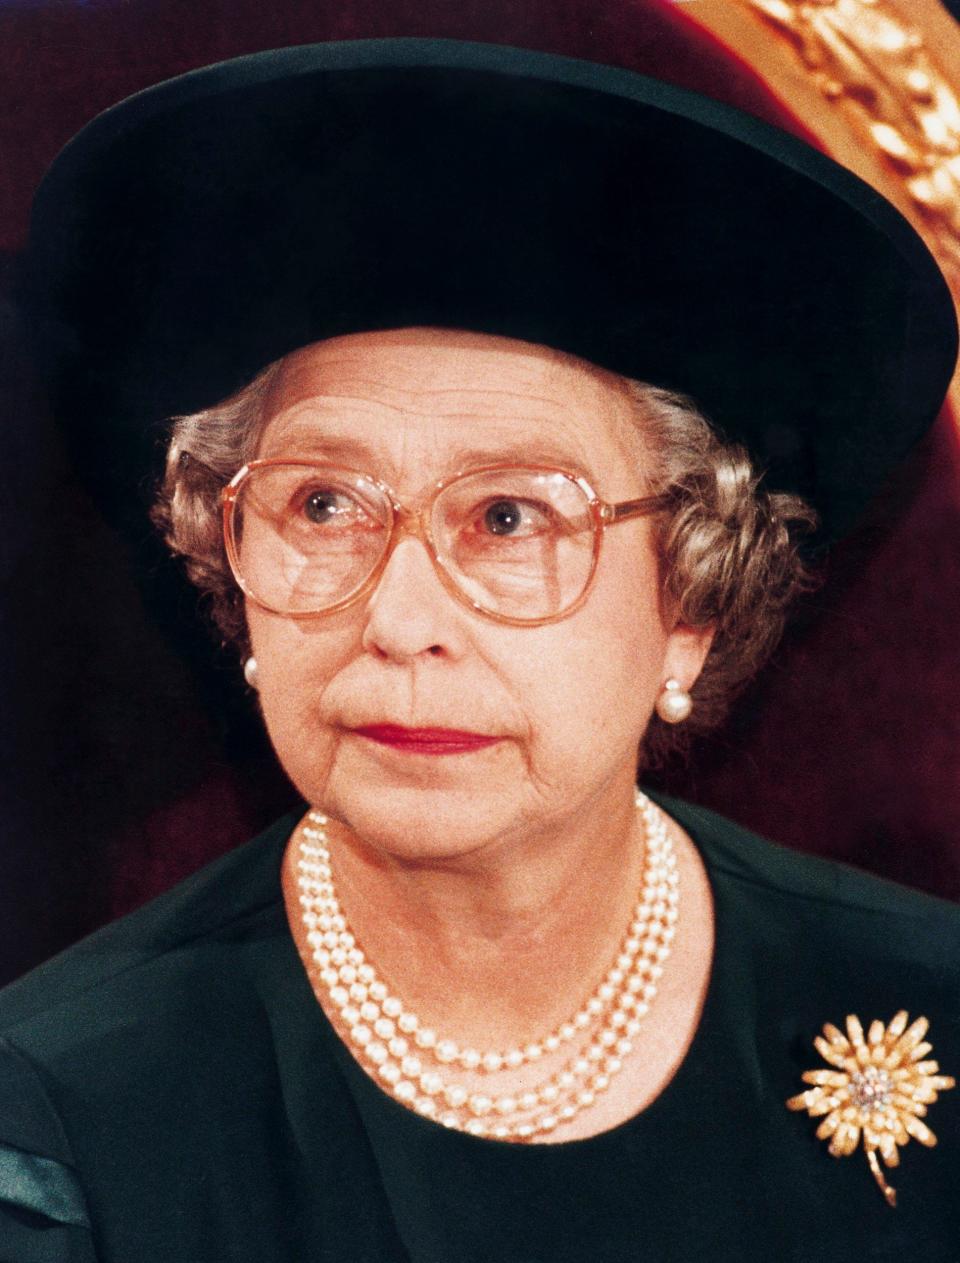 The Queen making her Annus Horribilis speech at the Guildhall in 1992 - Pool Photograph/Corbis/Corbis via Getty Images